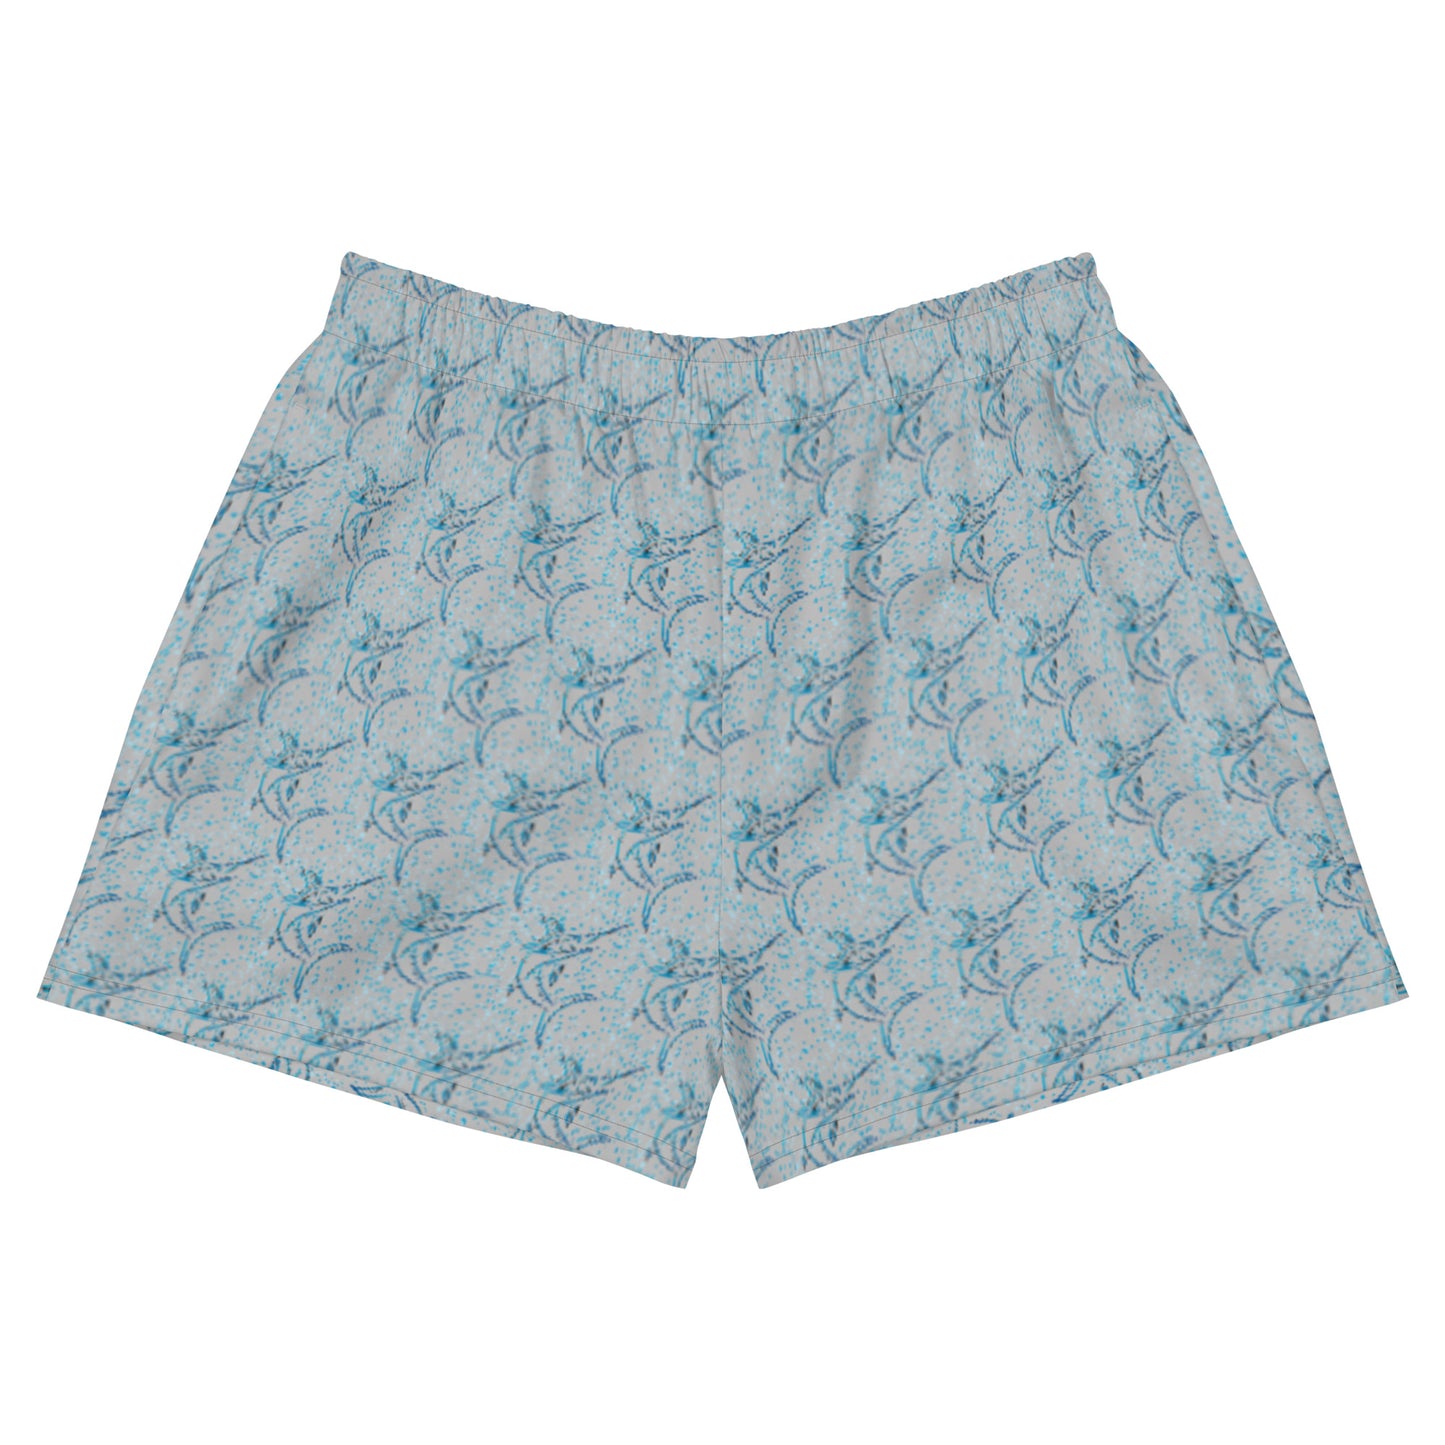 Marlin sketch pattern Women’s Recycled Athletic Shorts